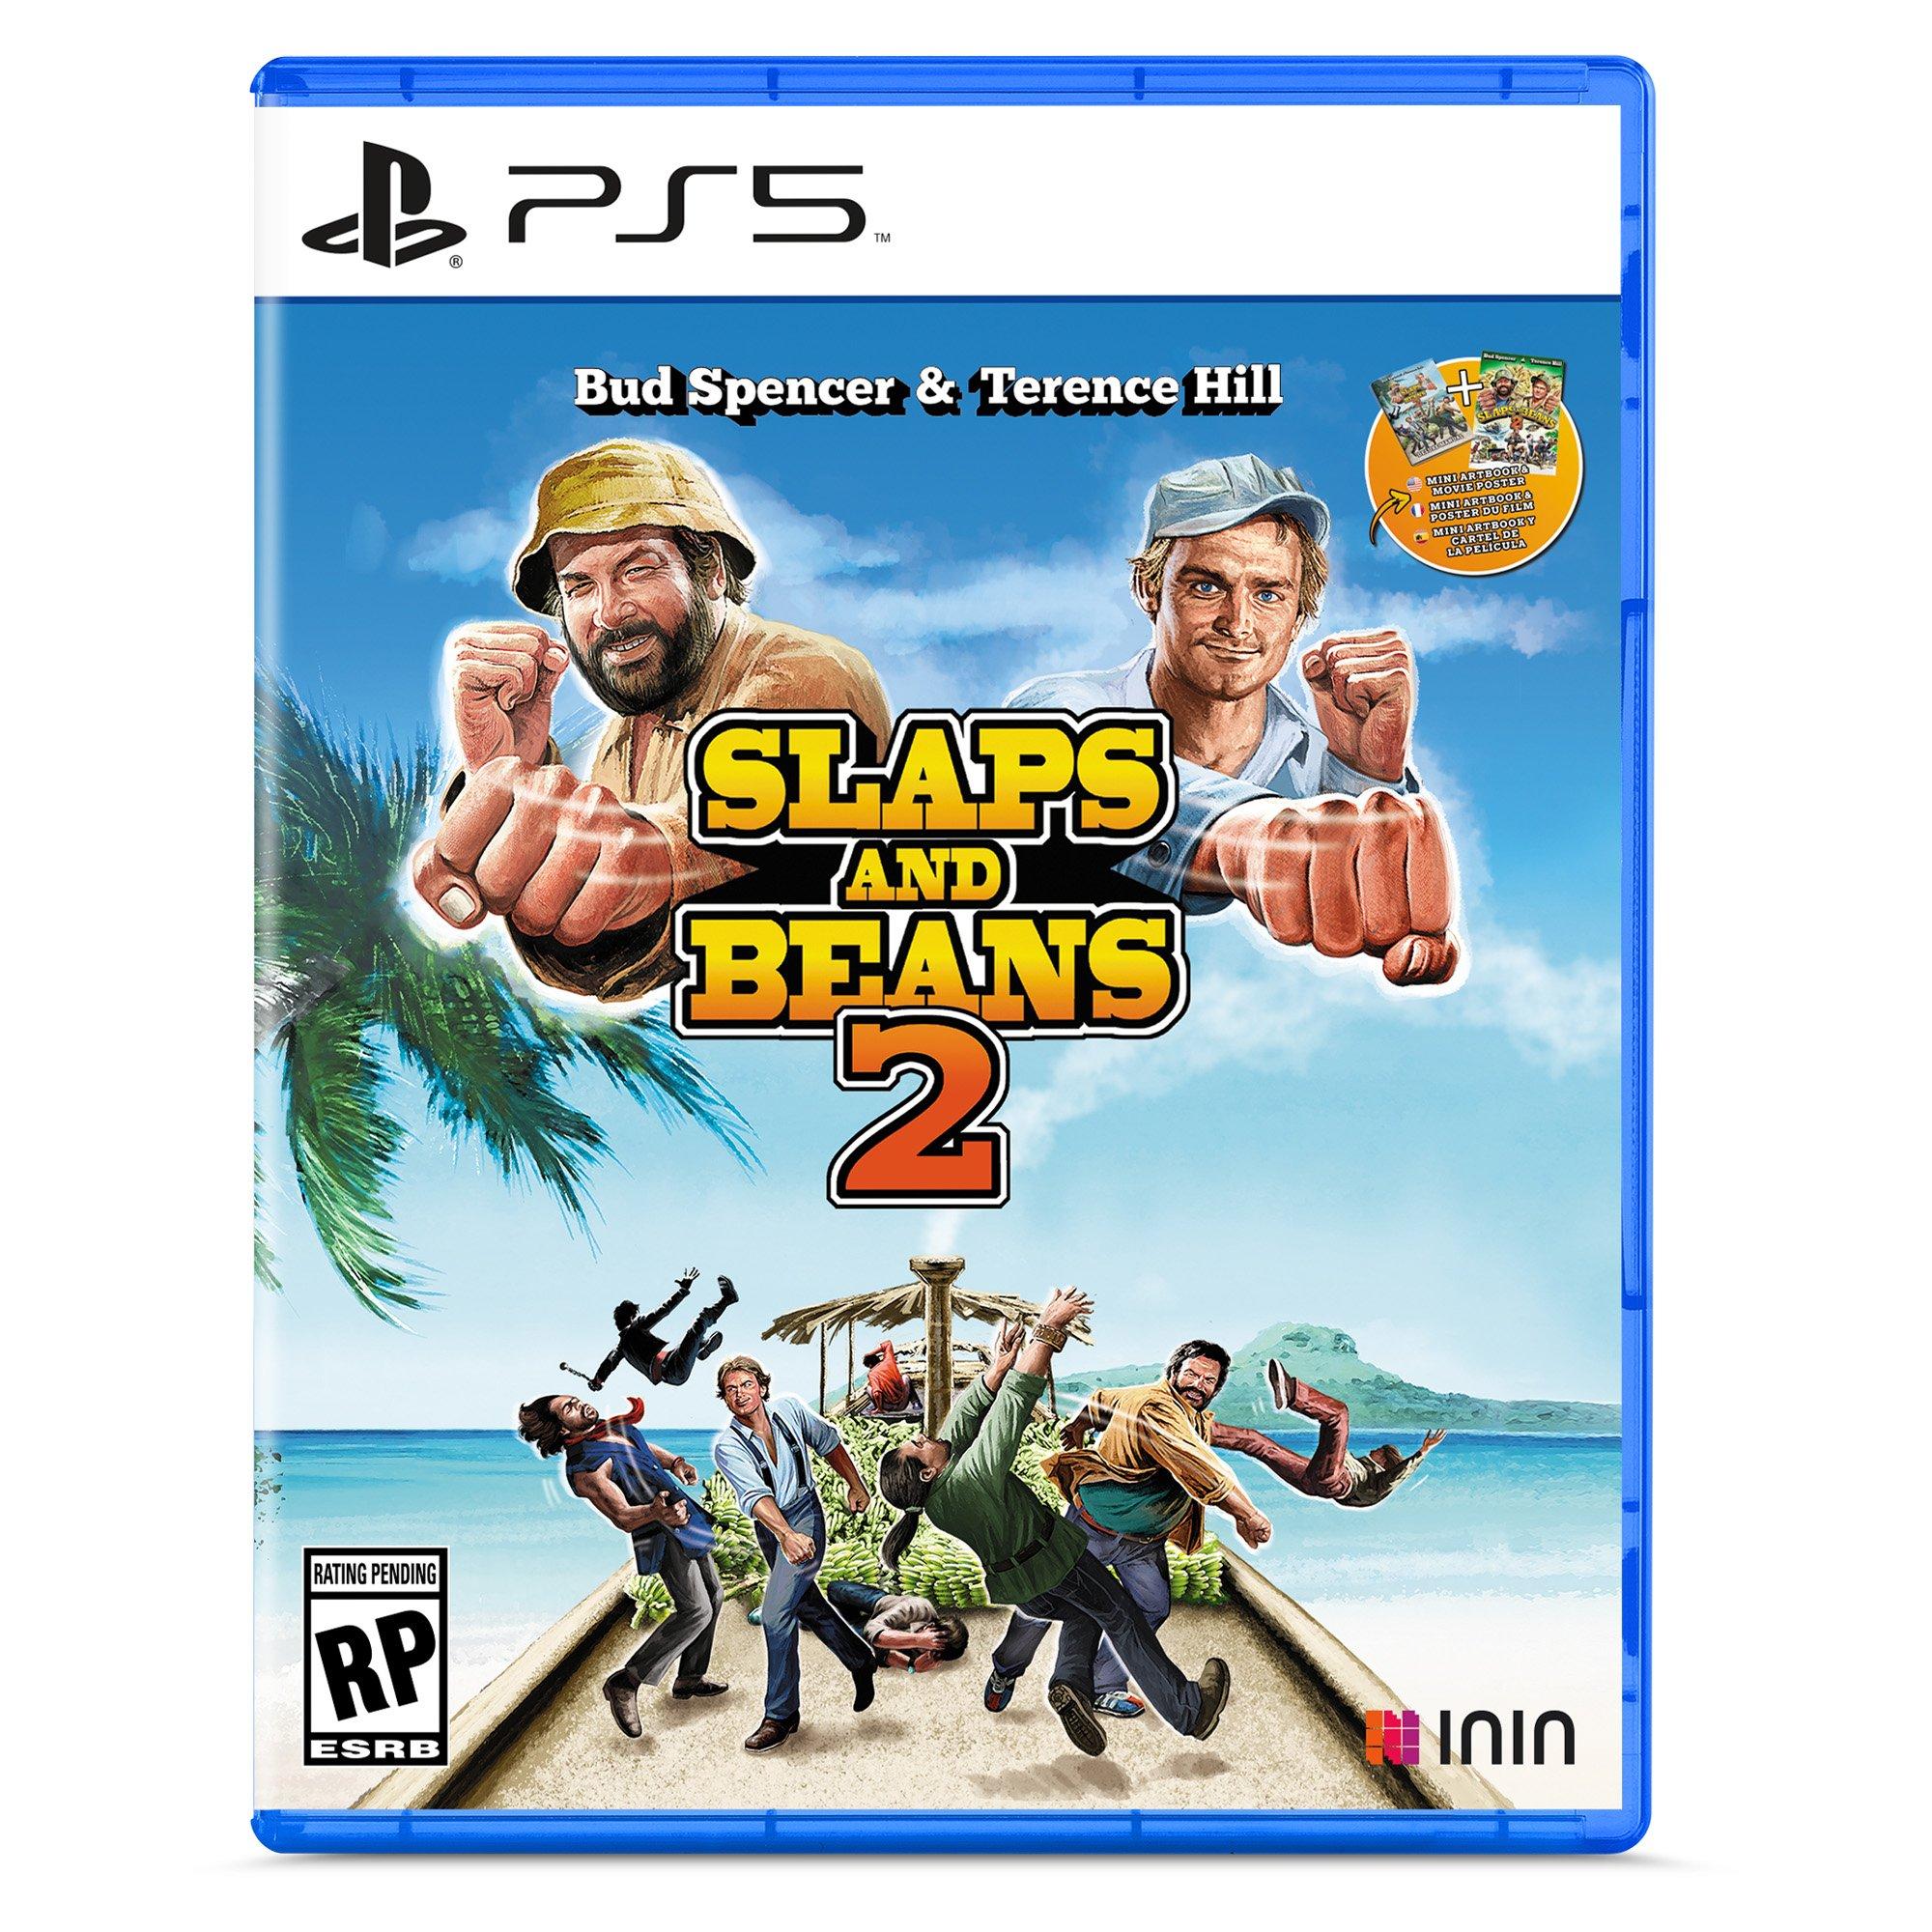 Bud Spencer and Terence Hill GameStop Beans - - | 2 Slaps 5 and PlayStation PlayStation | 5